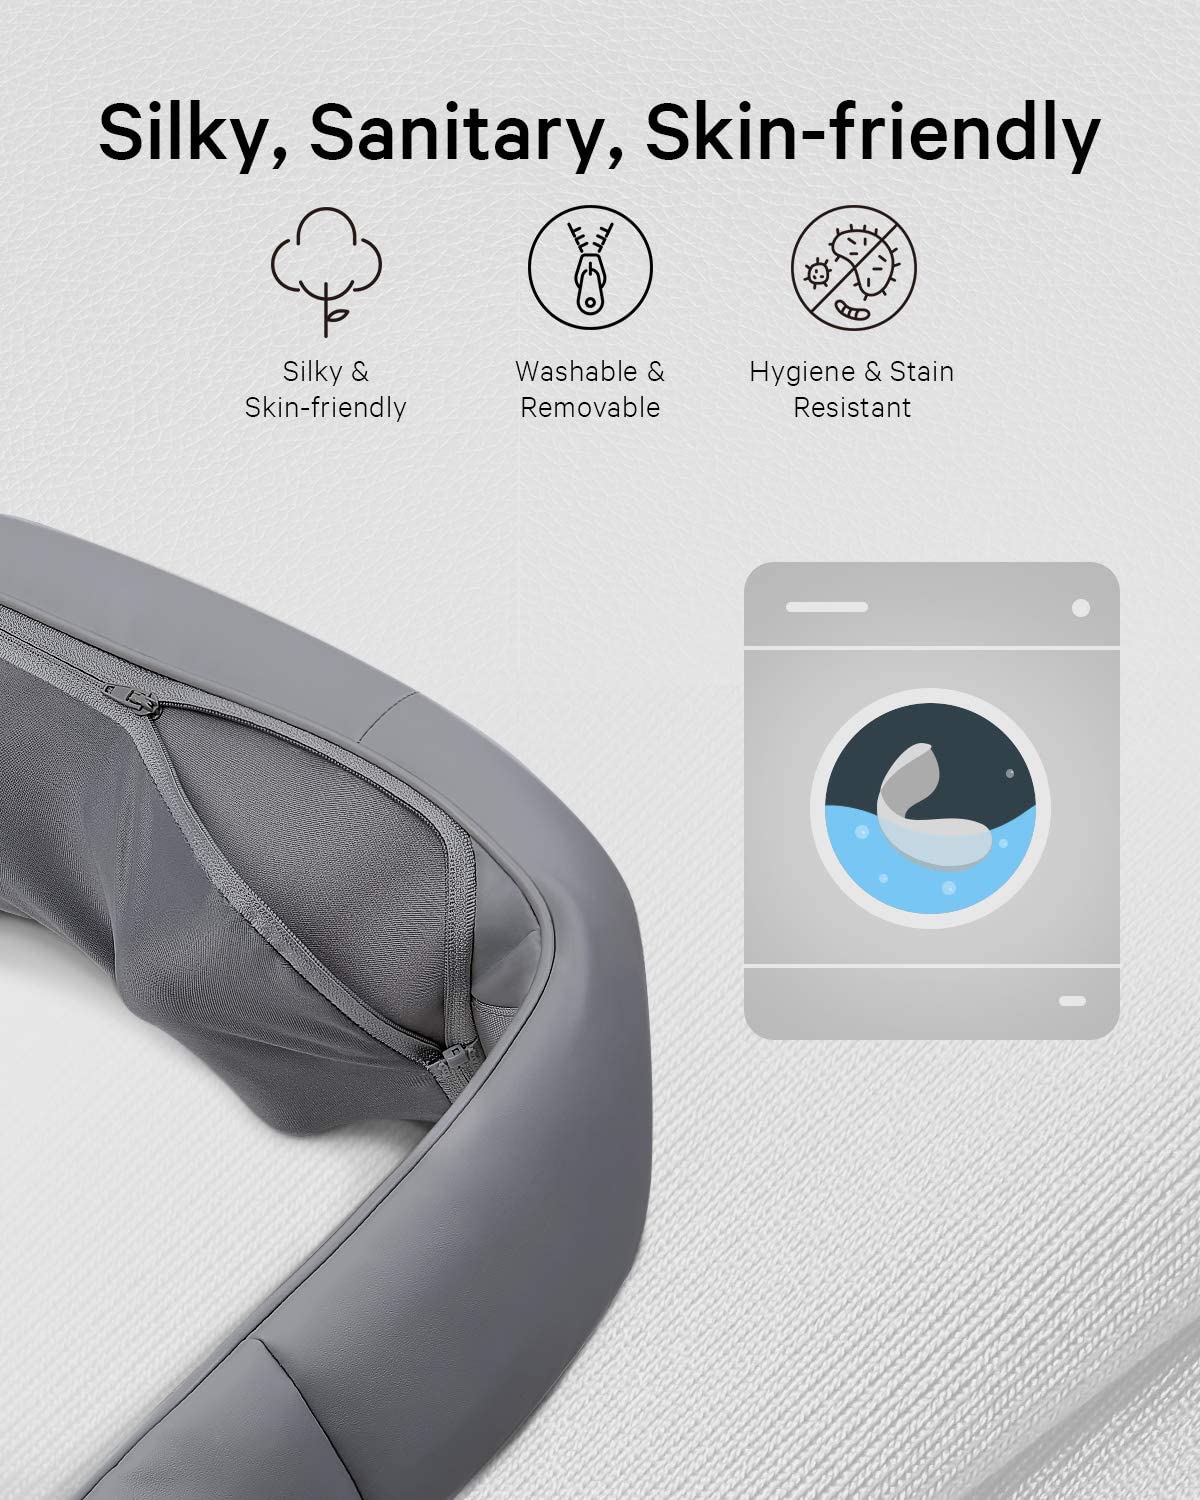 Load image into Gallery viewer, Naipo Neck Back Massager with Adjustable Heat and Straps for Neck and Back, Shoulder, Foot and Legs (Deep Gray) - NAIPO
